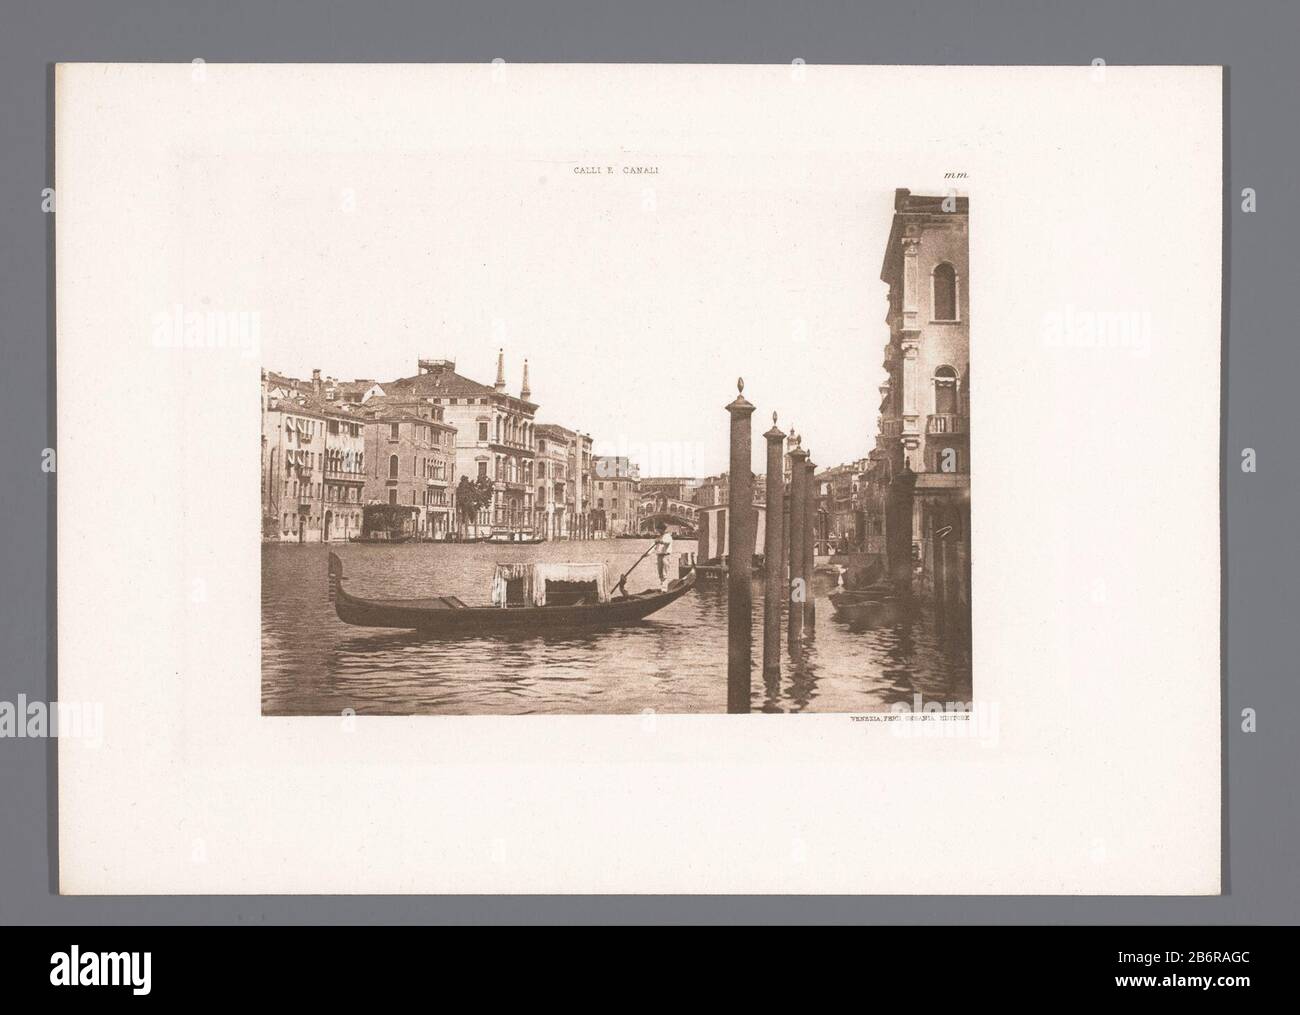 Canal Indicated Banque d'image et photos - Alamy